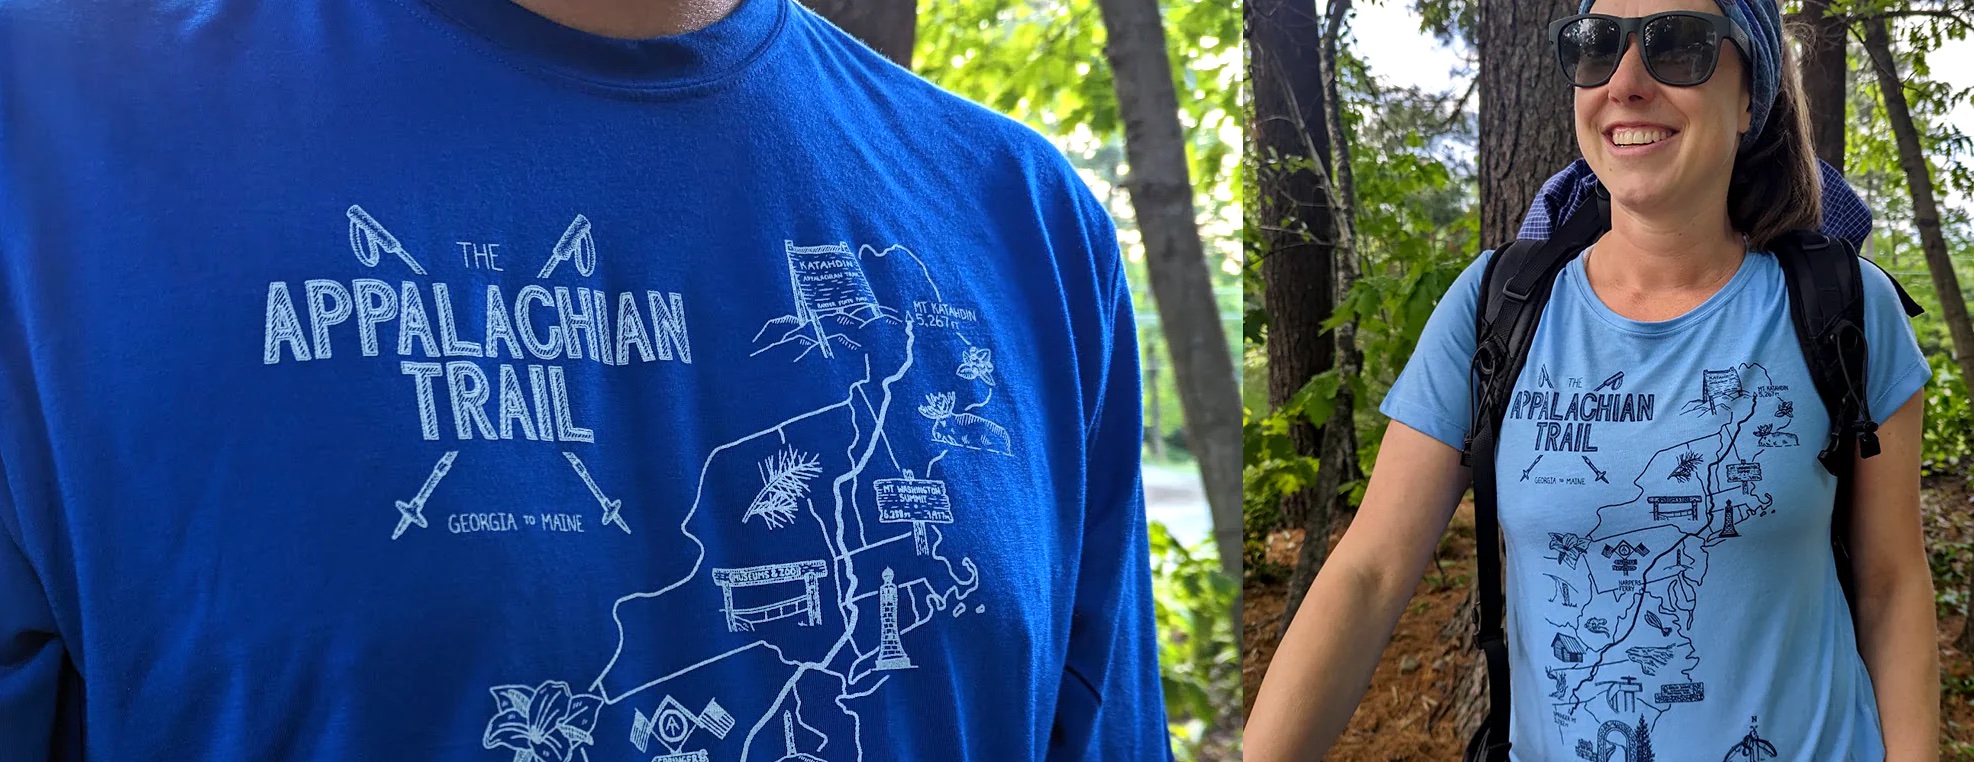 two people are wearing blue shirts with illustrated maps of the Appalachian Trail on them